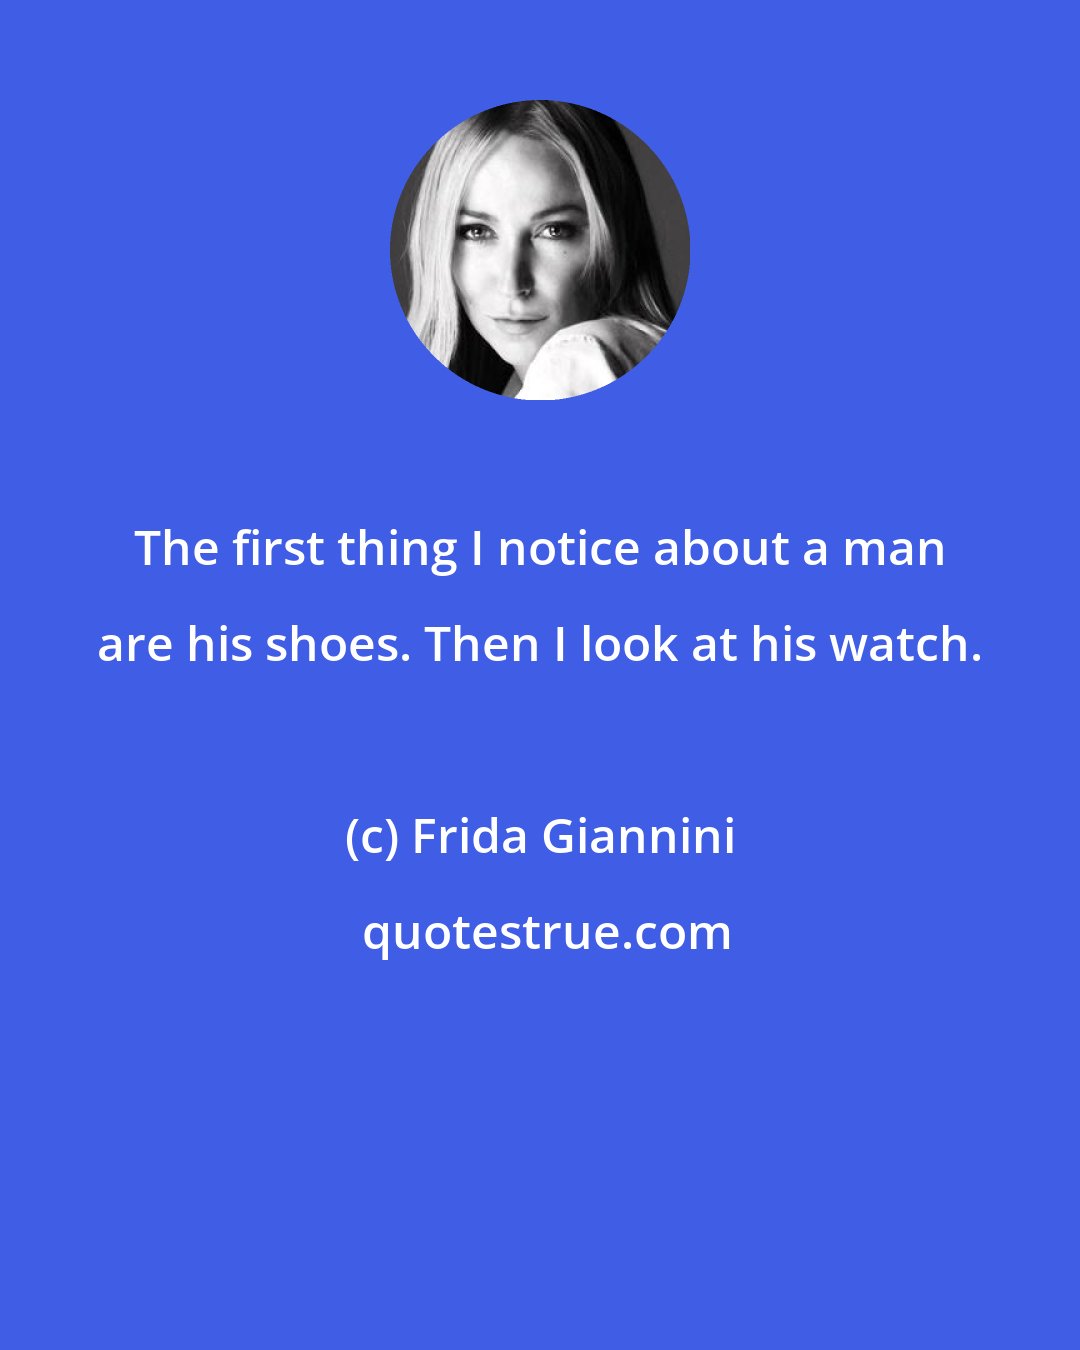 Frida Giannini: The first thing I notice about a man are his shoes. Then I look at his watch.